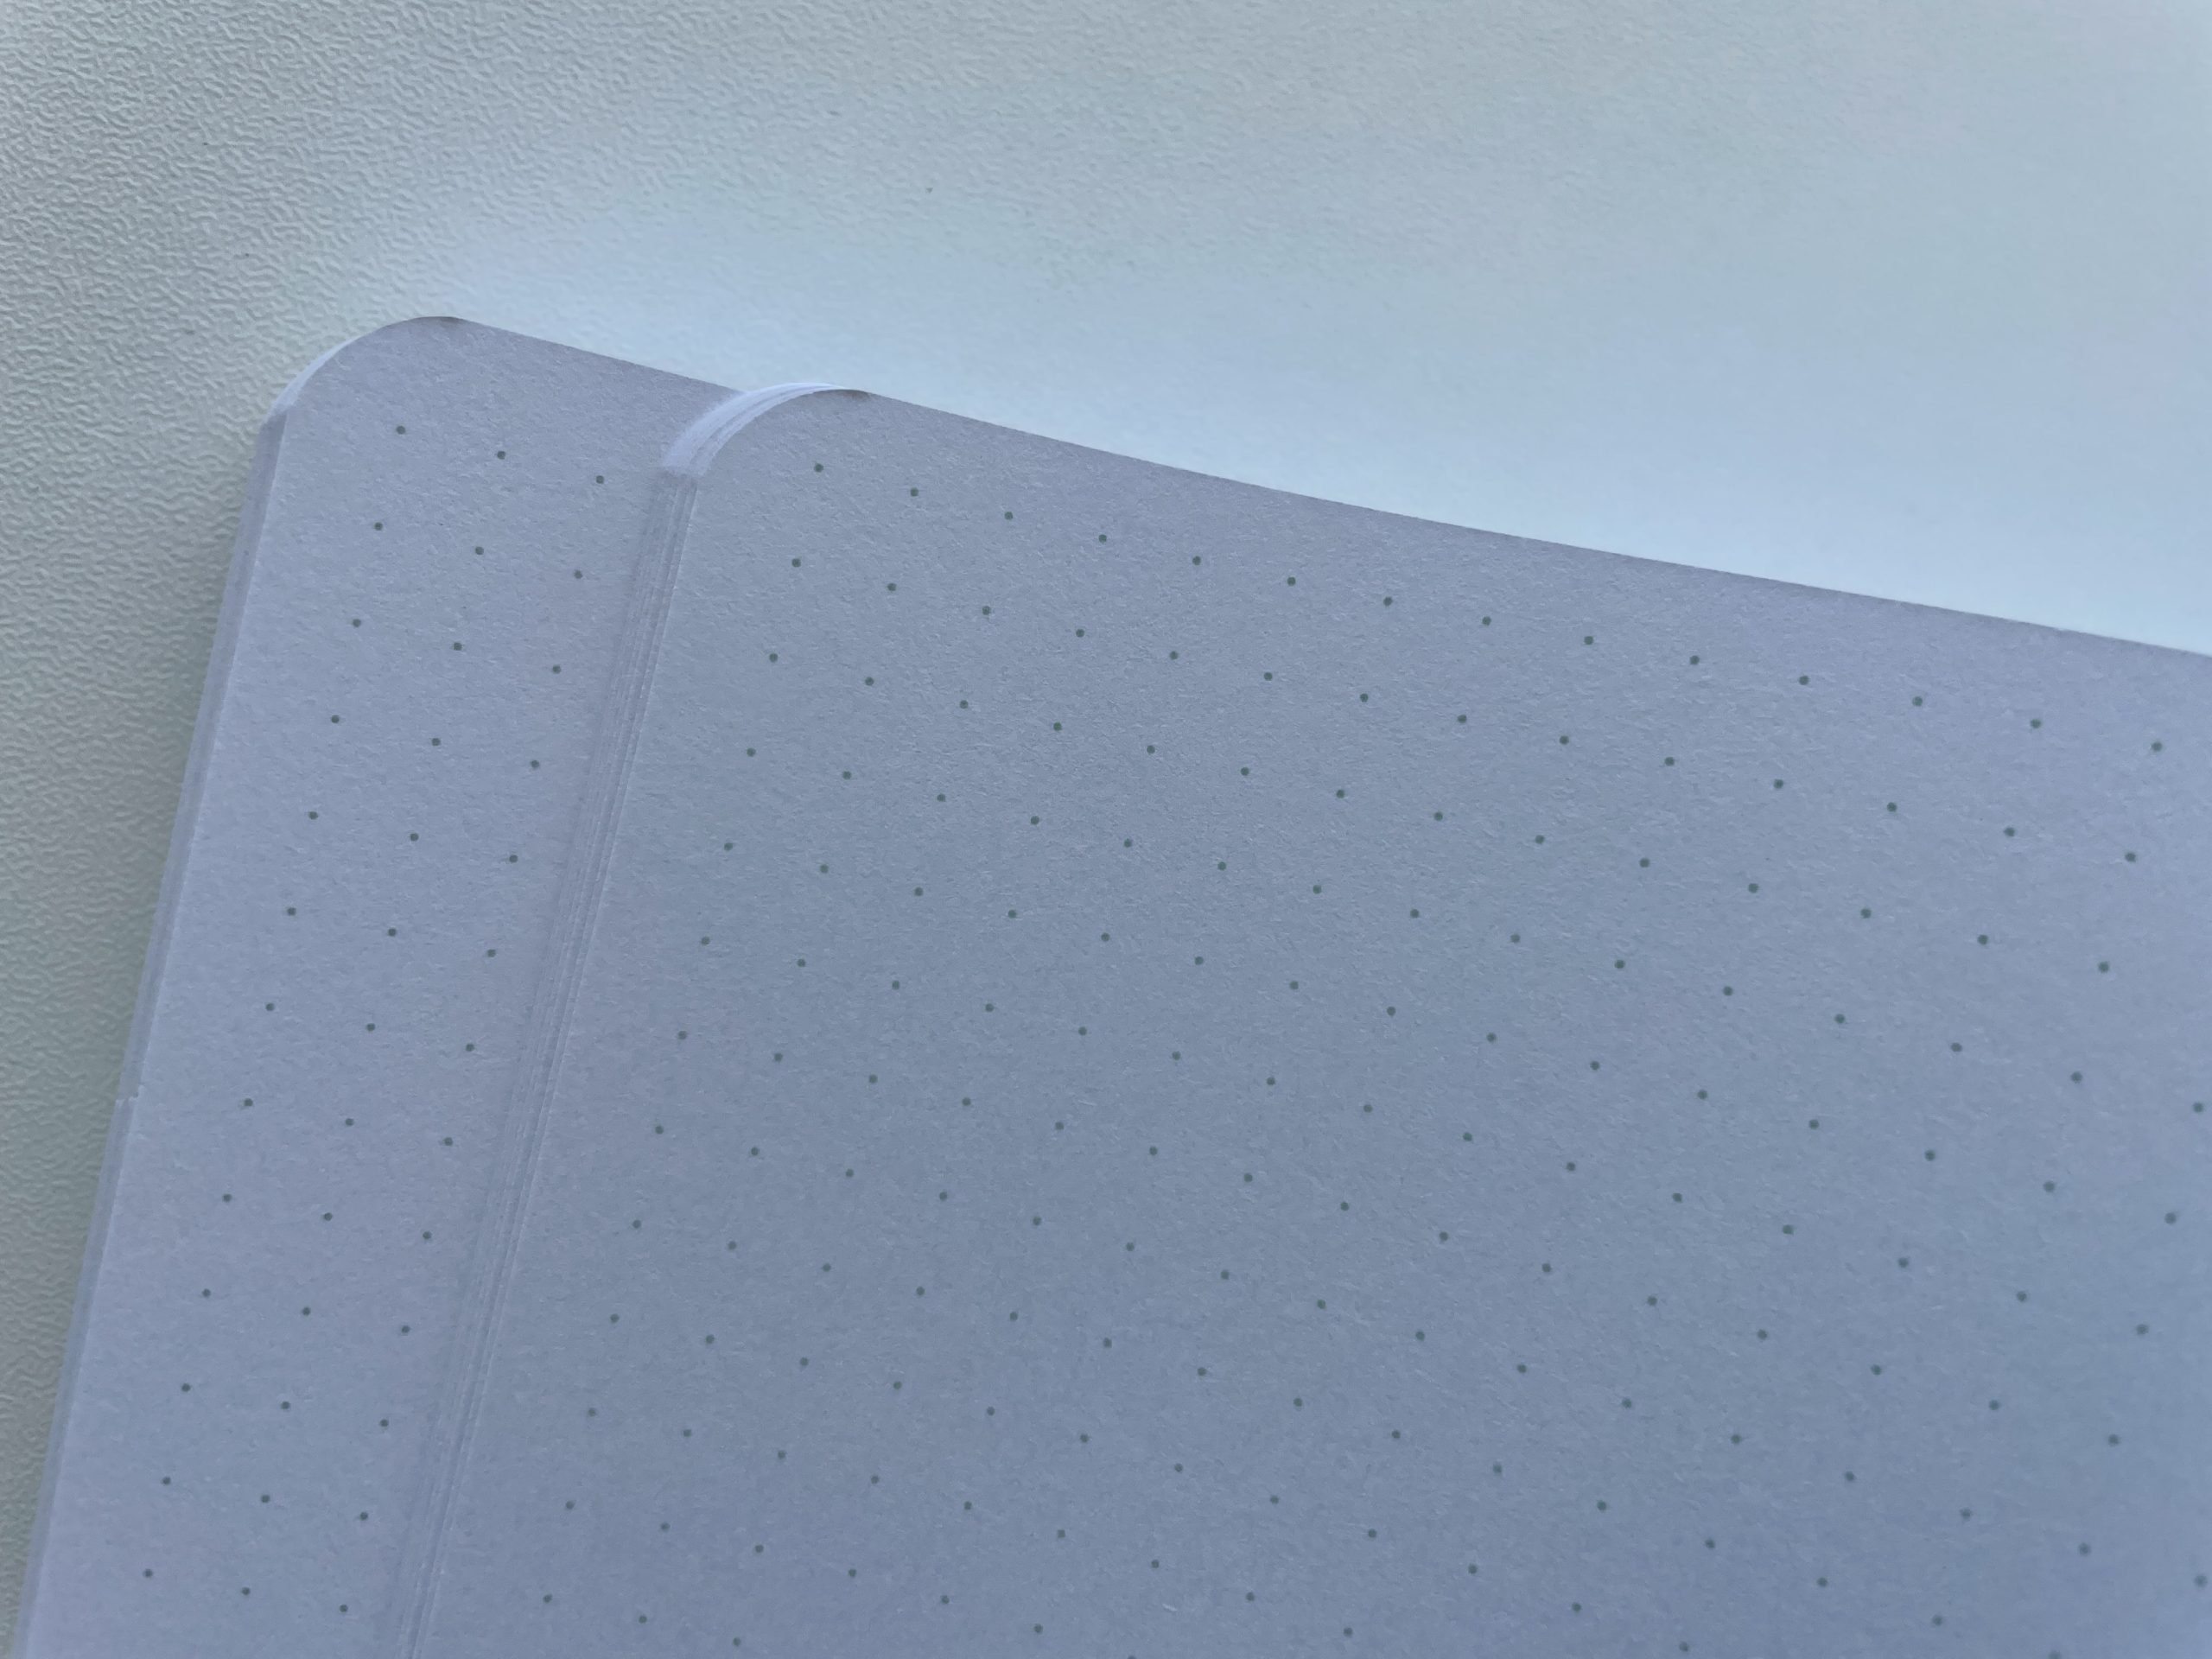 seques dot grid notebook for bullet journaling review 5mm dot grid bright white pages 160 GSM